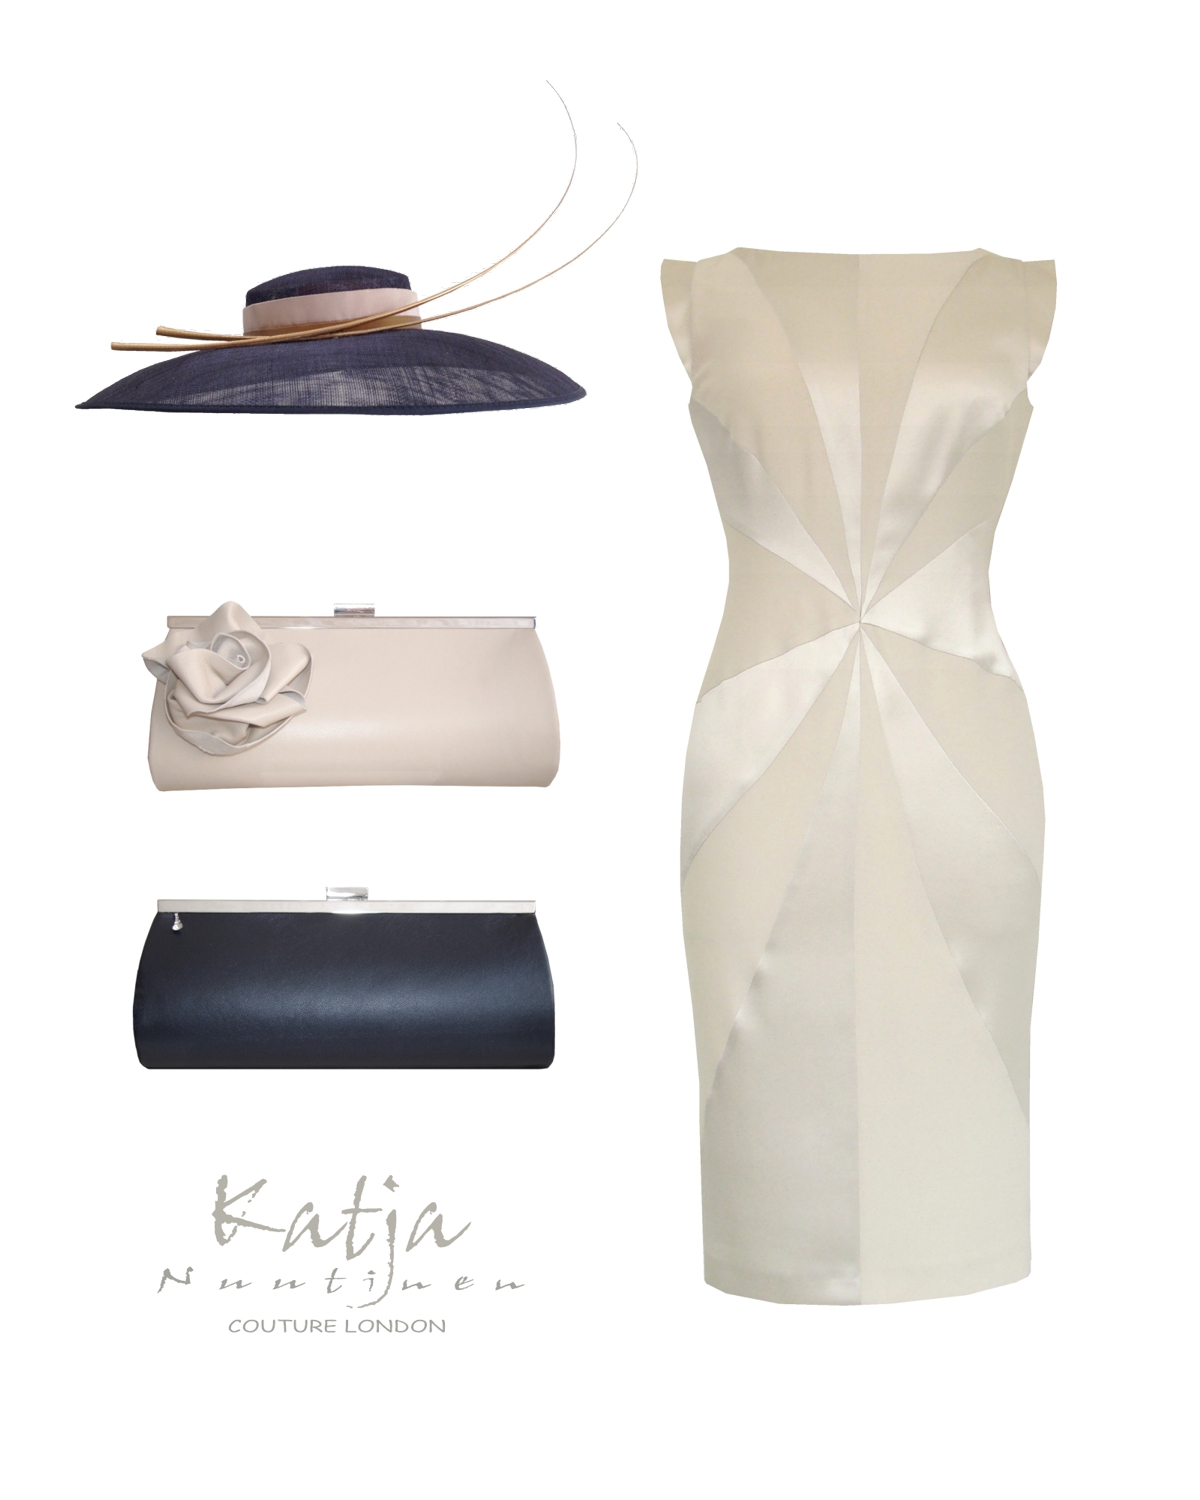 Designer outfit - Cream silk dress, grey hat with quills, nude and grey clutch bag